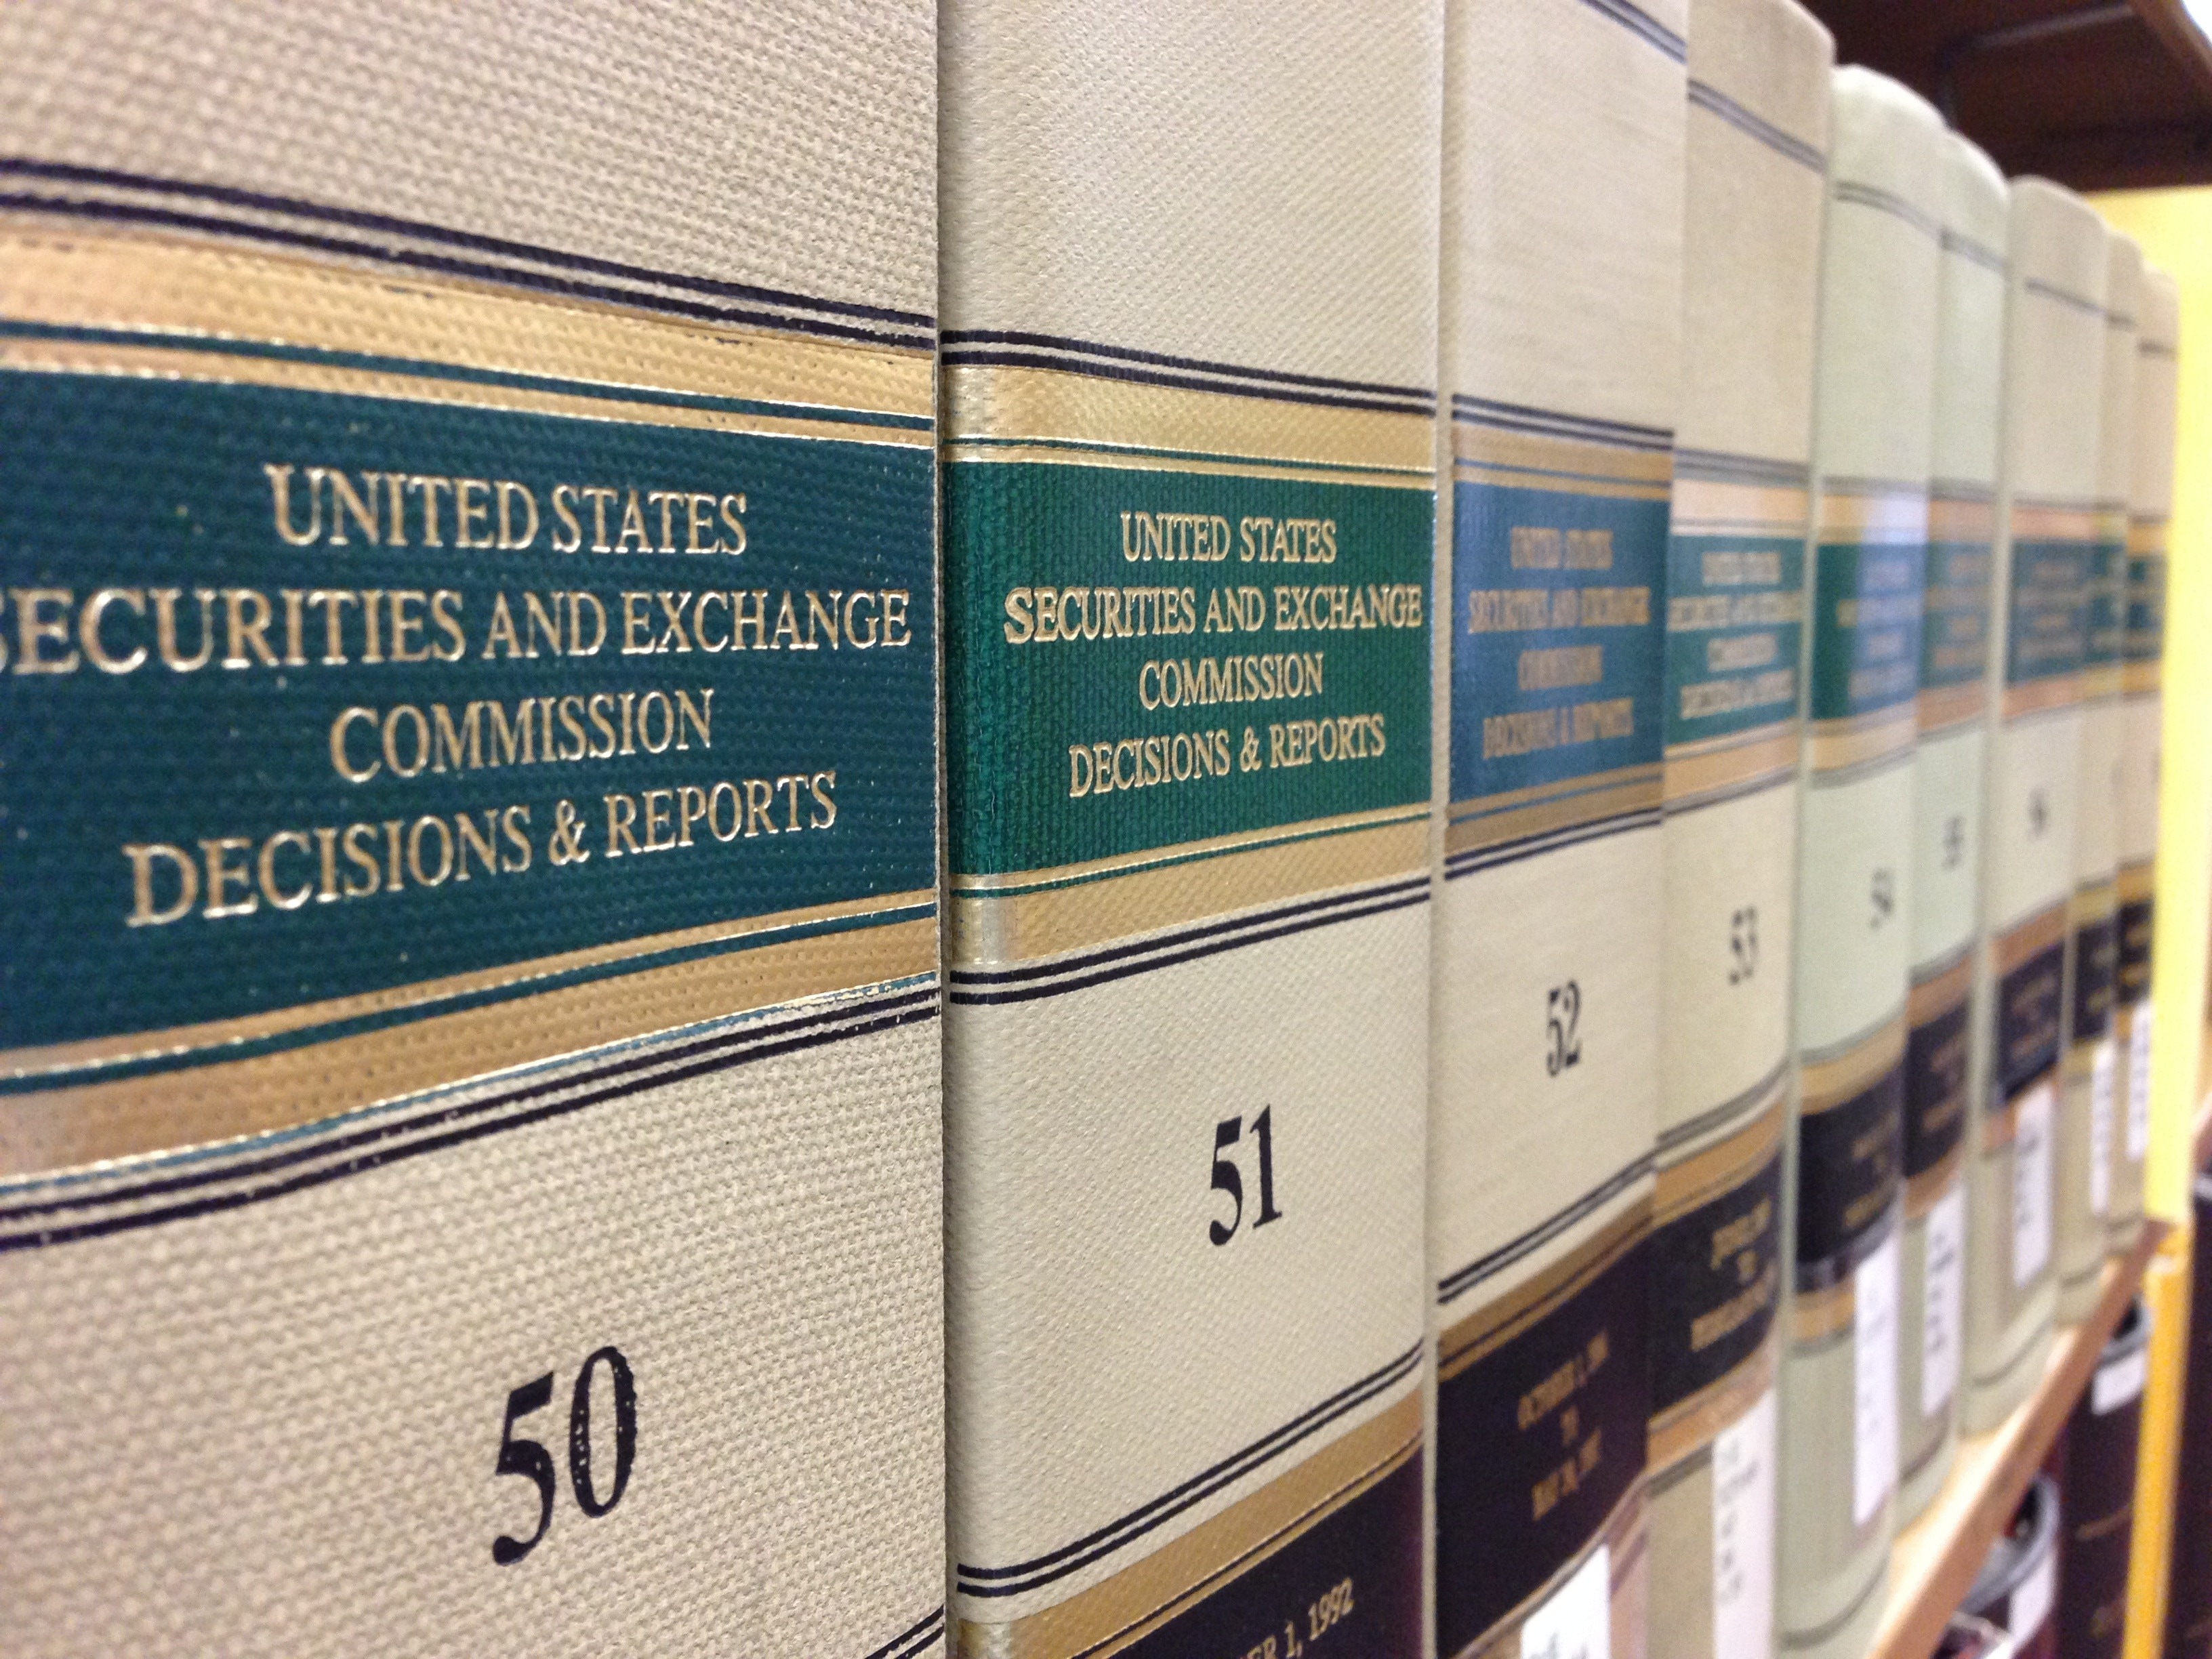 united states securities and exchange commission decision's & reports books